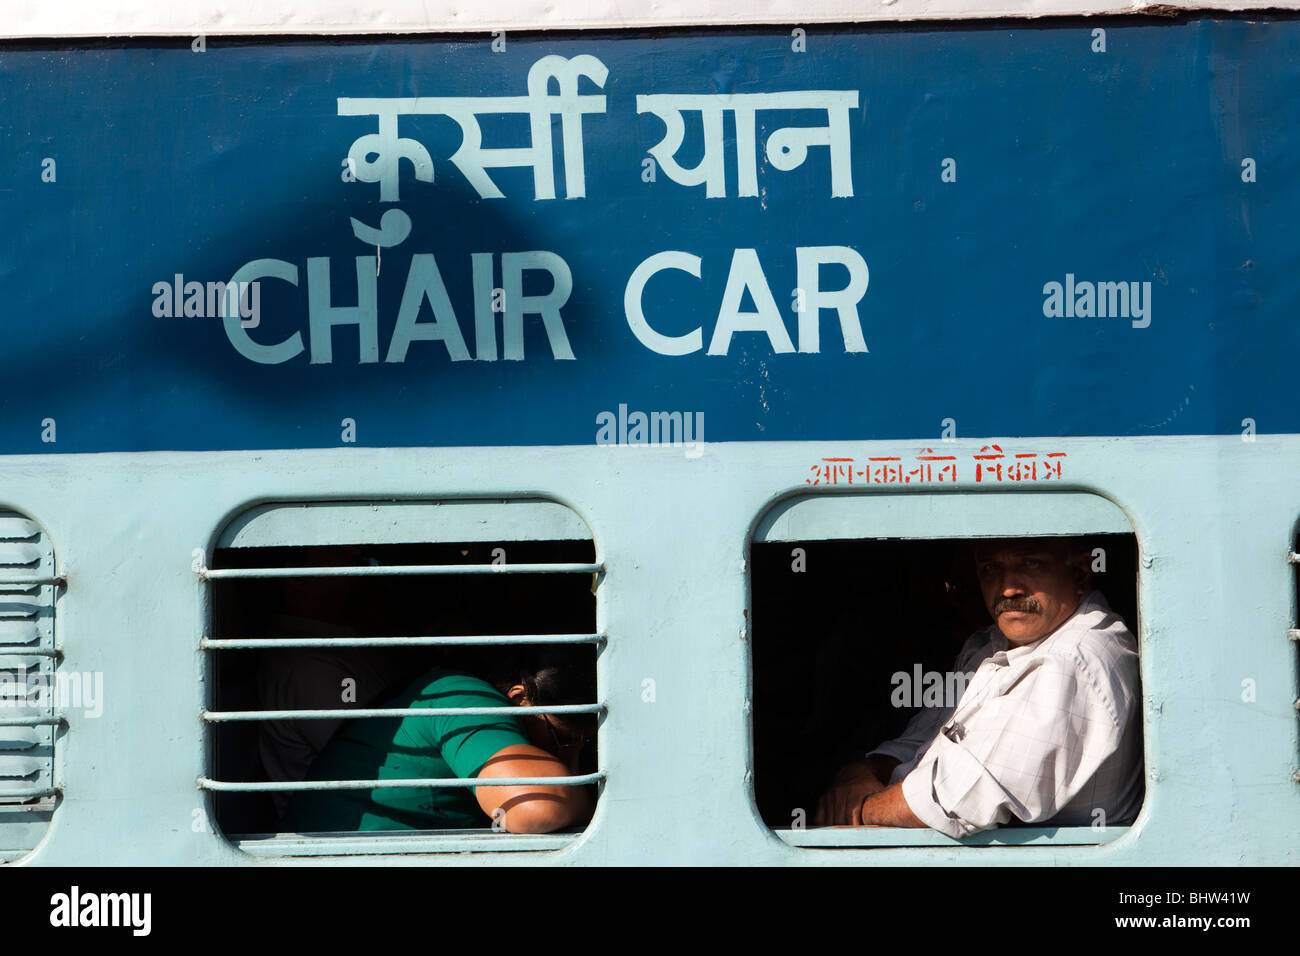 Southern, India, Kerala; Kollam Railway Station, passengers in second class chair car carriage windows Stock Photo